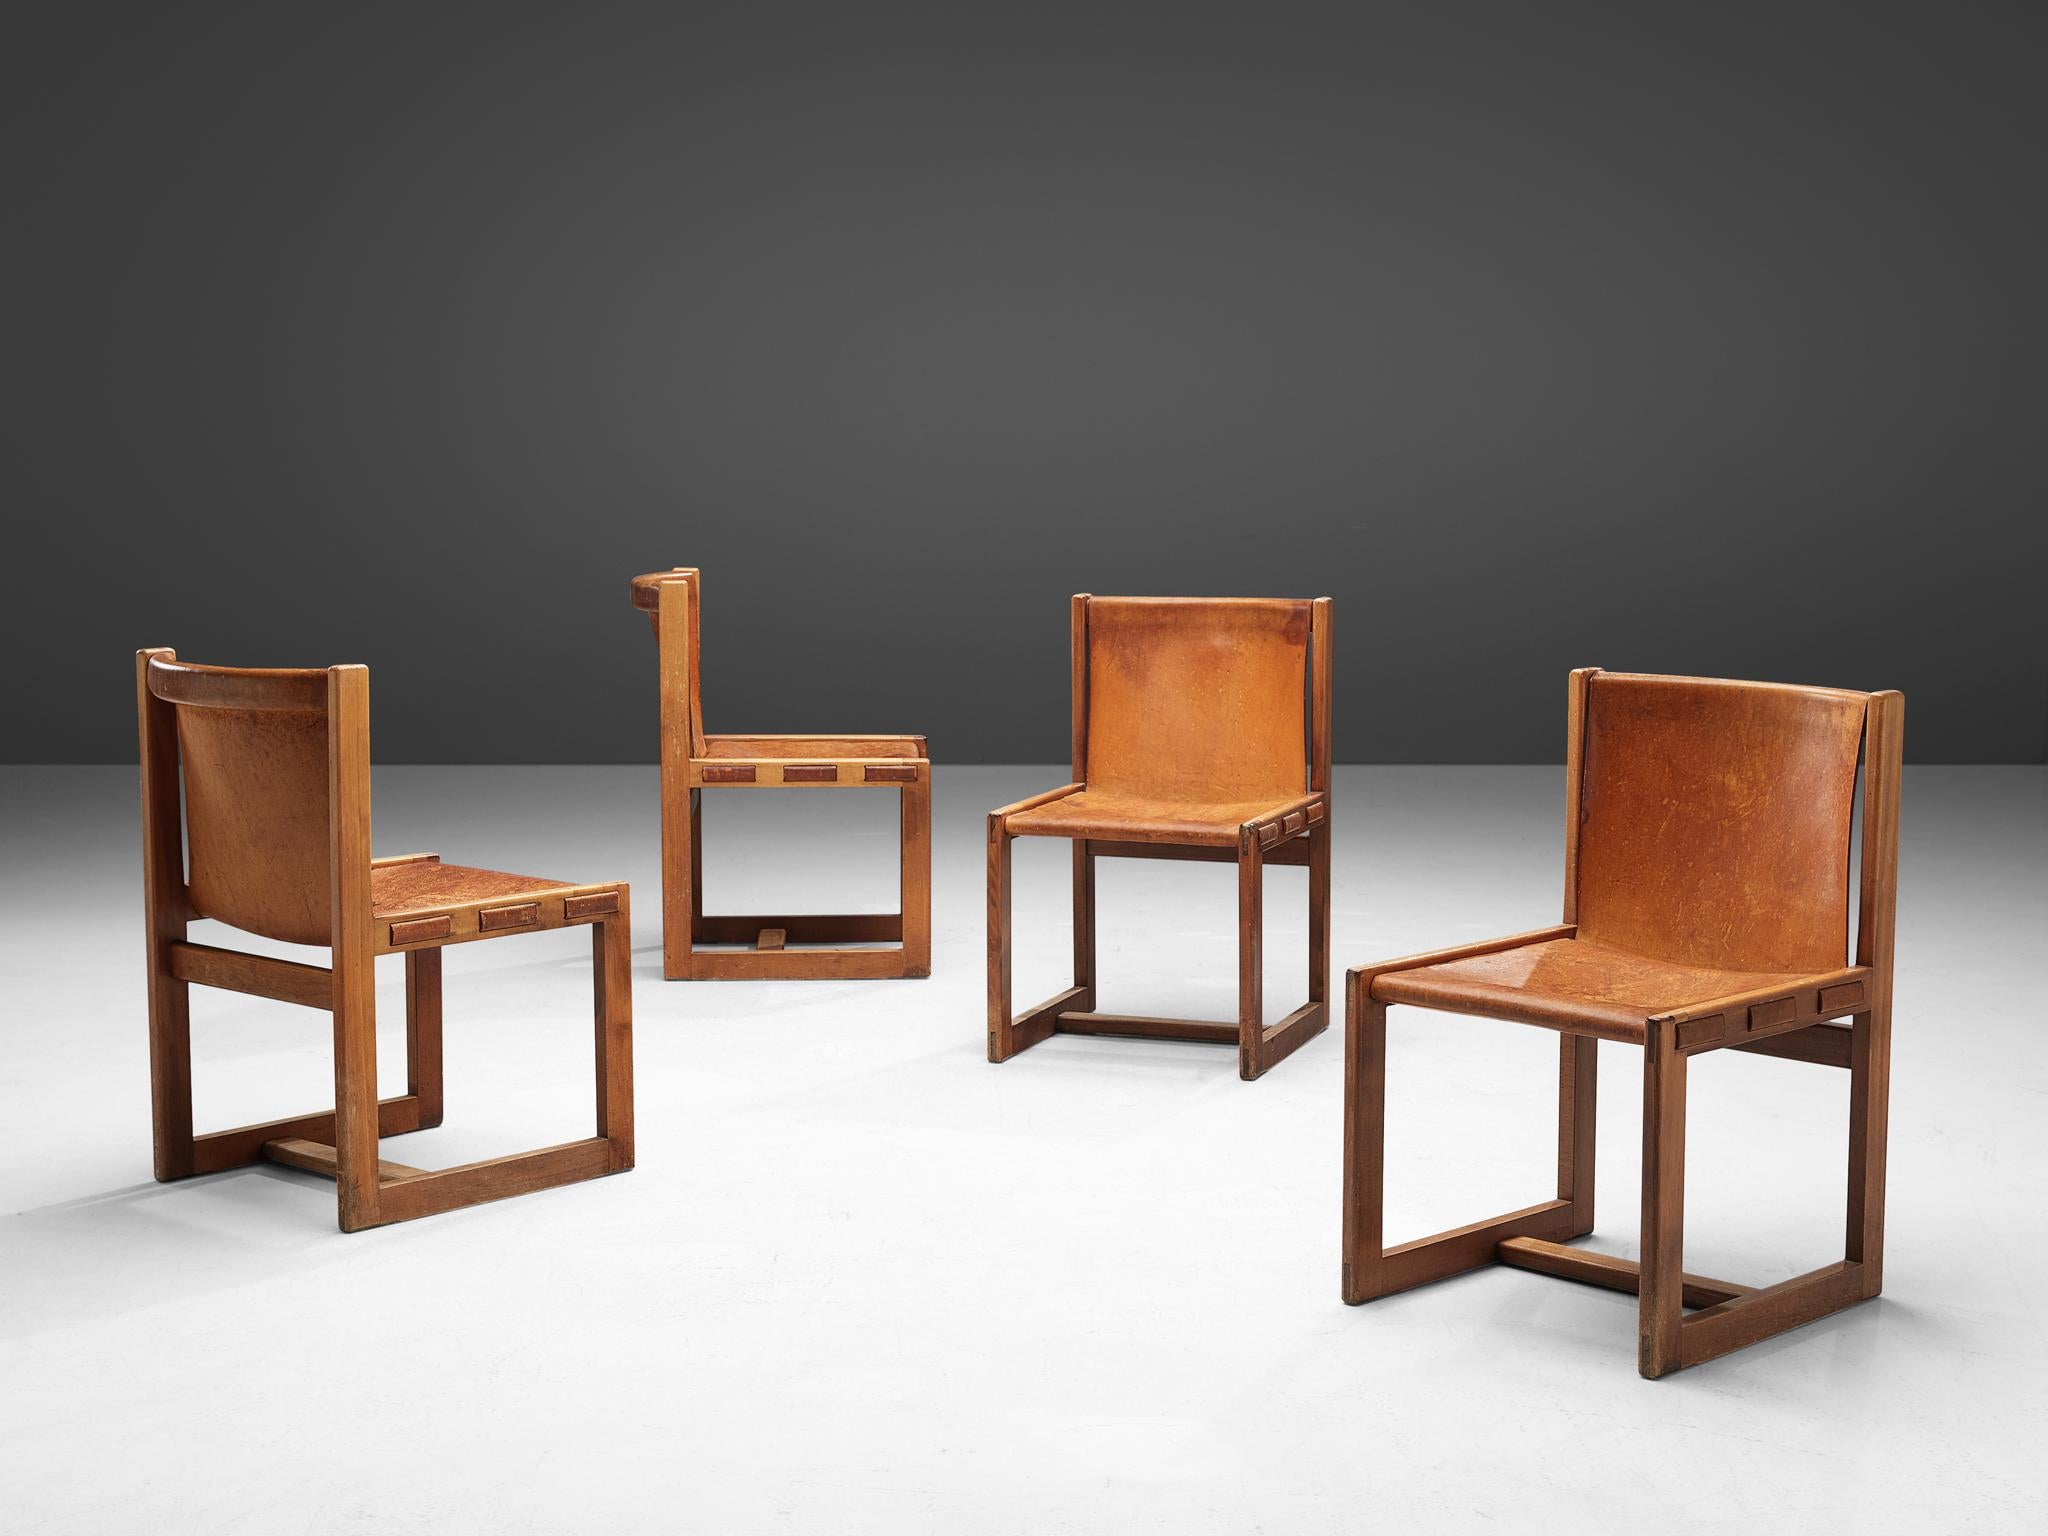 Set of four dining chairs, cognac leather and beech, Italy, 1960s

These Italian dining chairs show a basic design with straight lines, and a sincere construction in beech wood. The cognac leather seats and backs provide a pleasant comfort, and